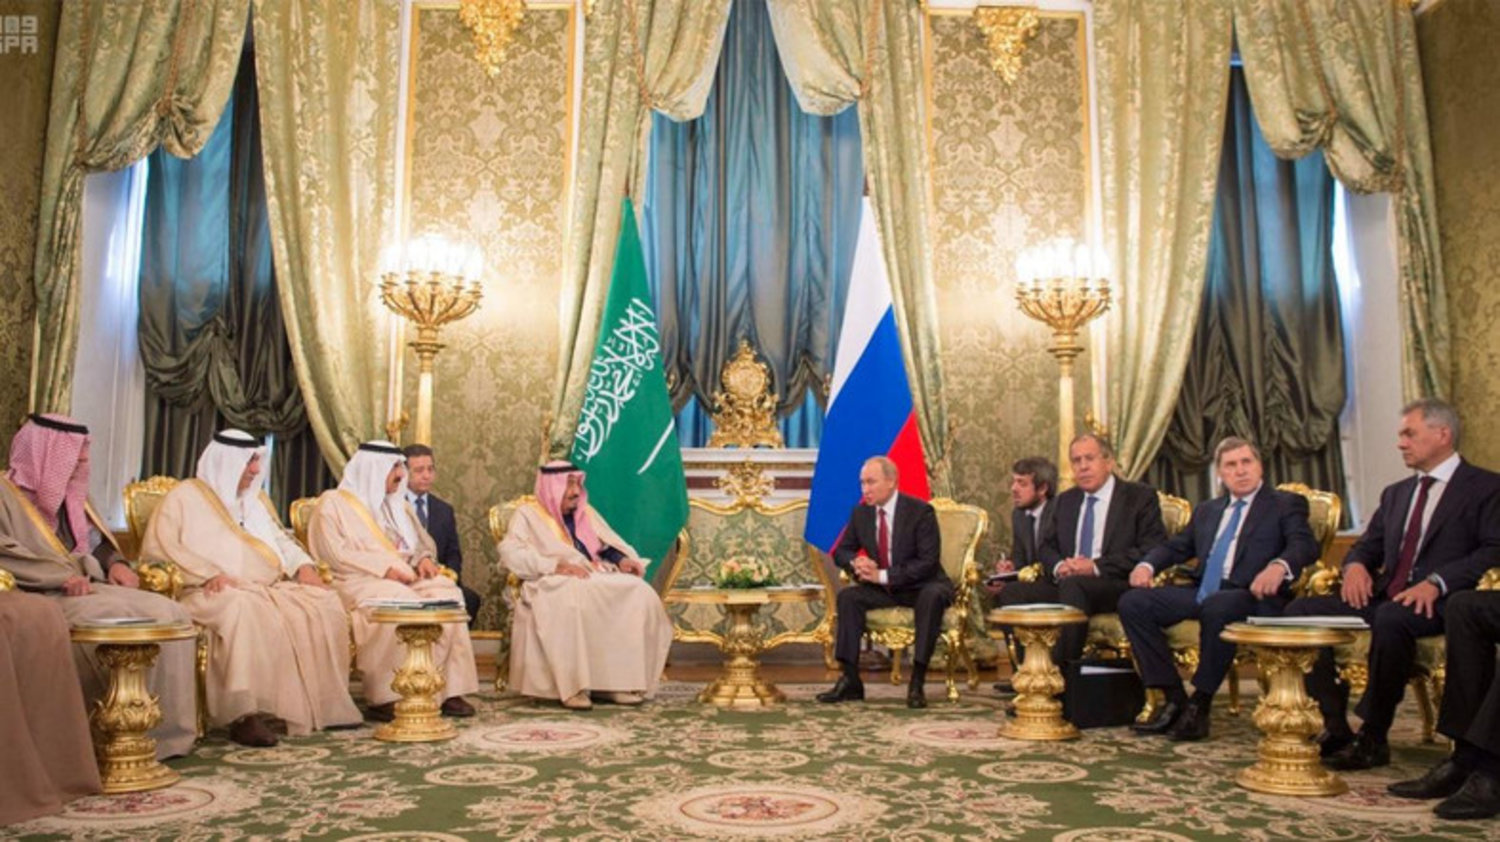 King Salman Says Coordination with Russia Continues on All That Promotes Security, Prosperity